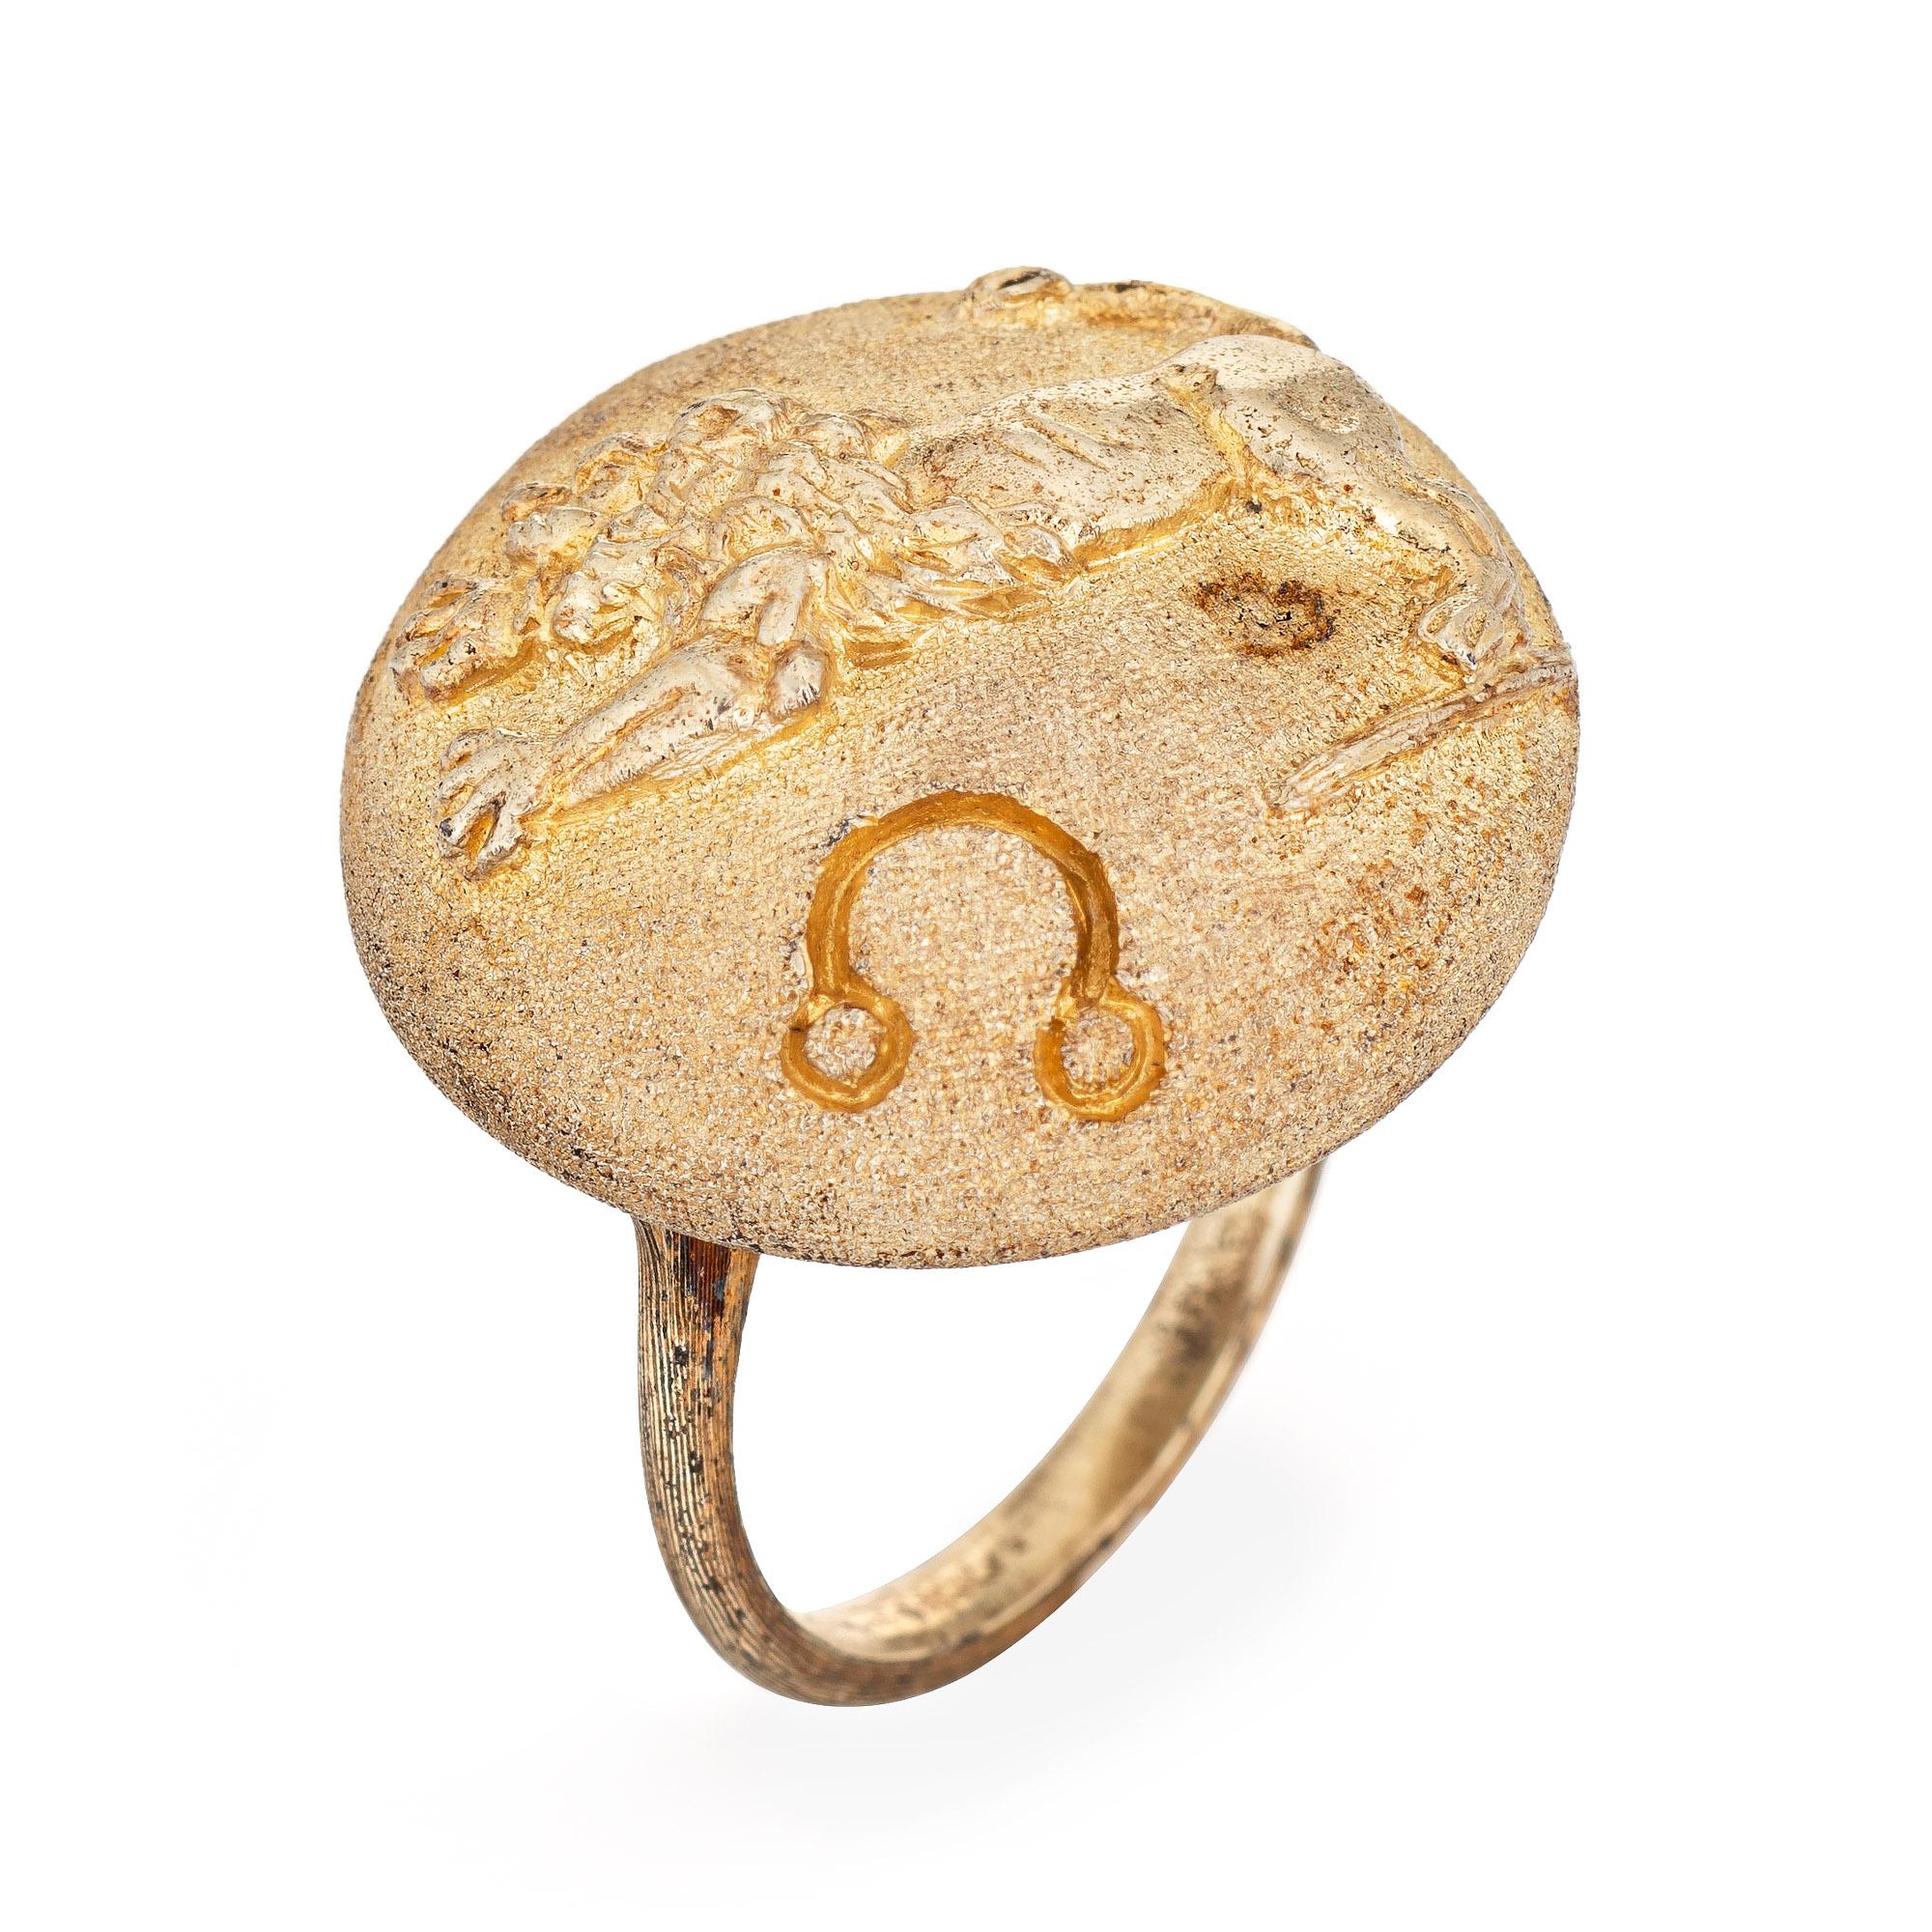 Stylish vintage Buccellati Leo zodiac ring crafted in sterling silver gilt. 

The finely detailed ring features a lion to the round domed mount. Designed by Gianmaria Buccellati the ring is a great example of the intricate work from the famed